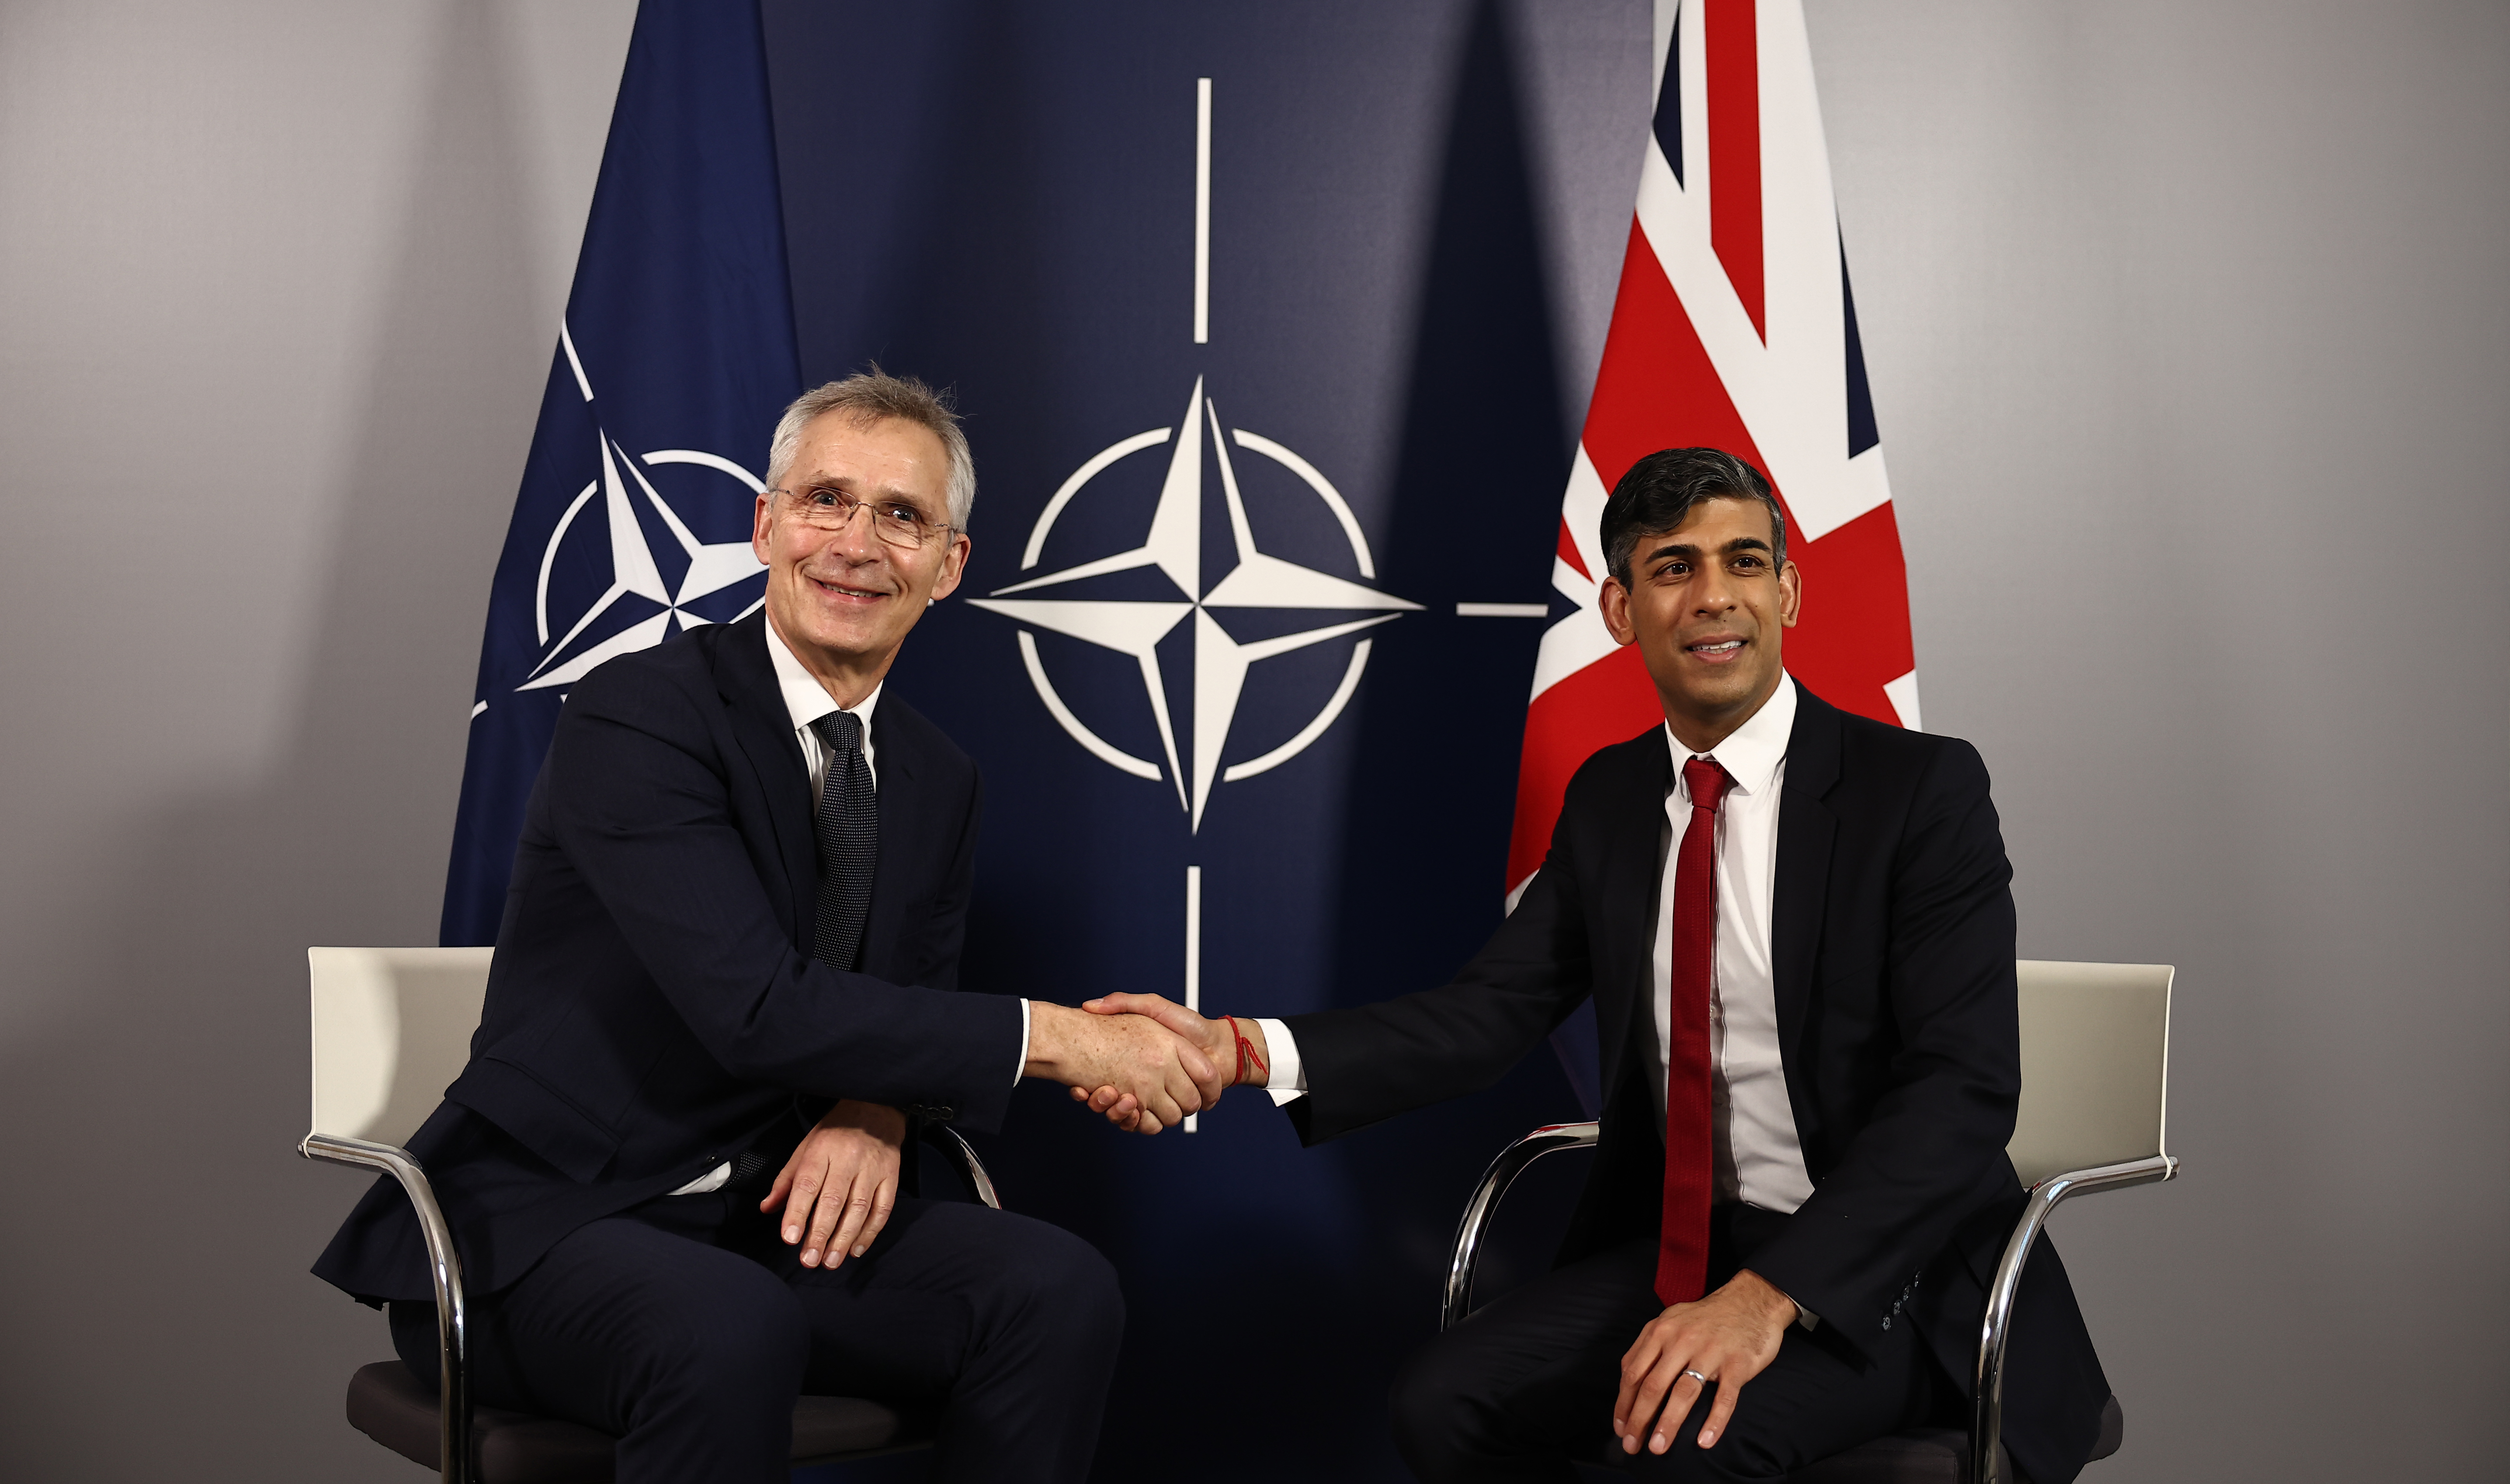 NATO Secretary General Jens Stoltenberg and Prime Minister Rishi Sunak shake hands prior to talks at the Warsaw Armoured Brigade